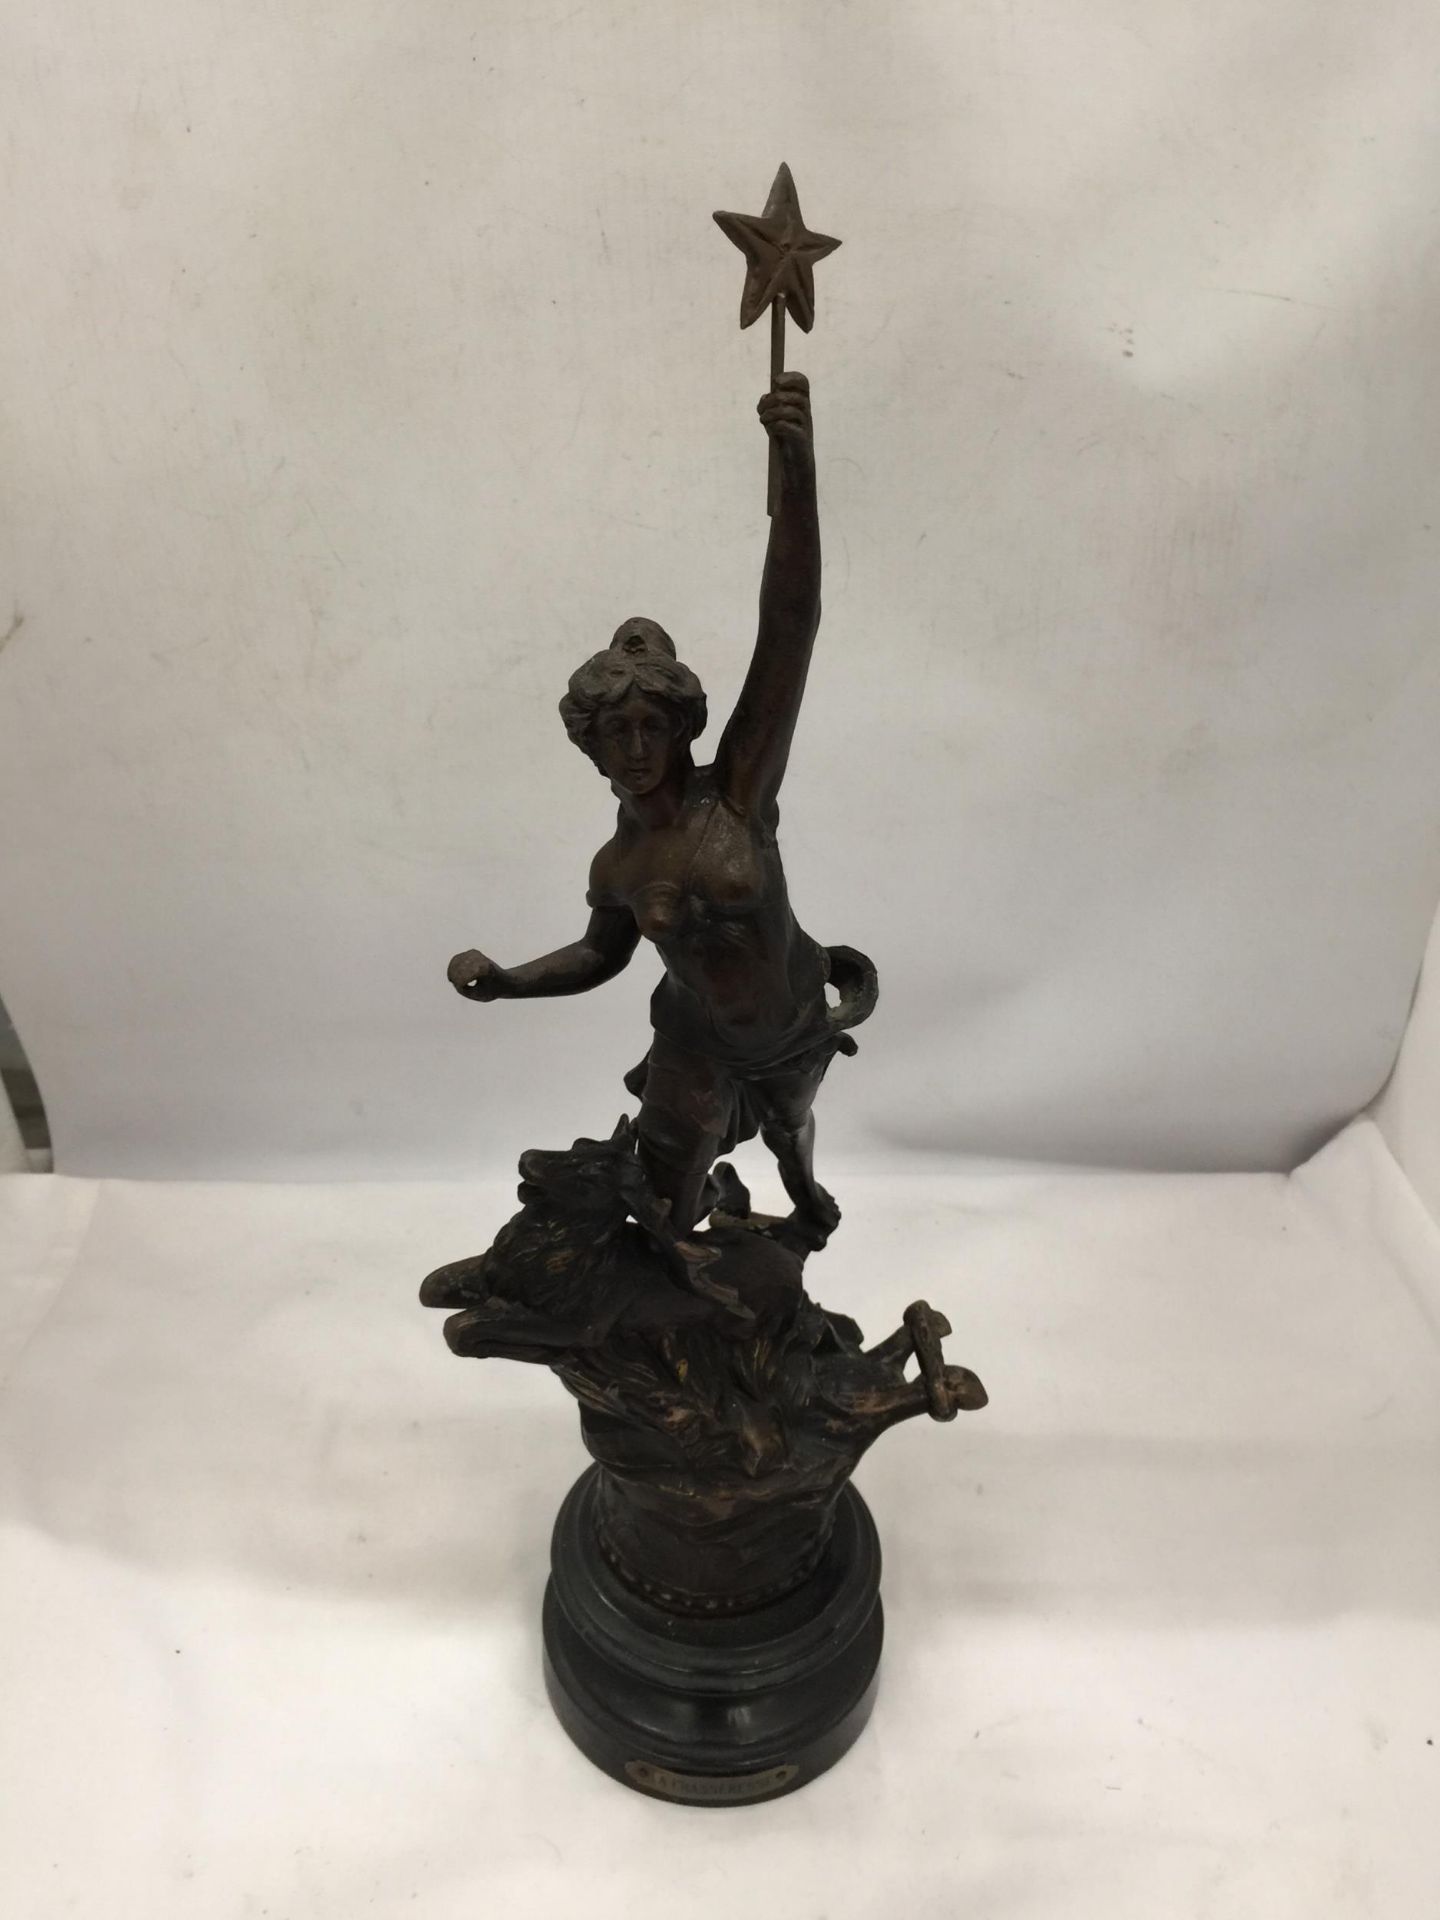 A PAIR OF VINTAGE FRENCH SPELTER CLASSICAL FIGURES TITLED 'LE CHASSEUR' AND 'LA CHASSERESSE' - Image 5 of 7